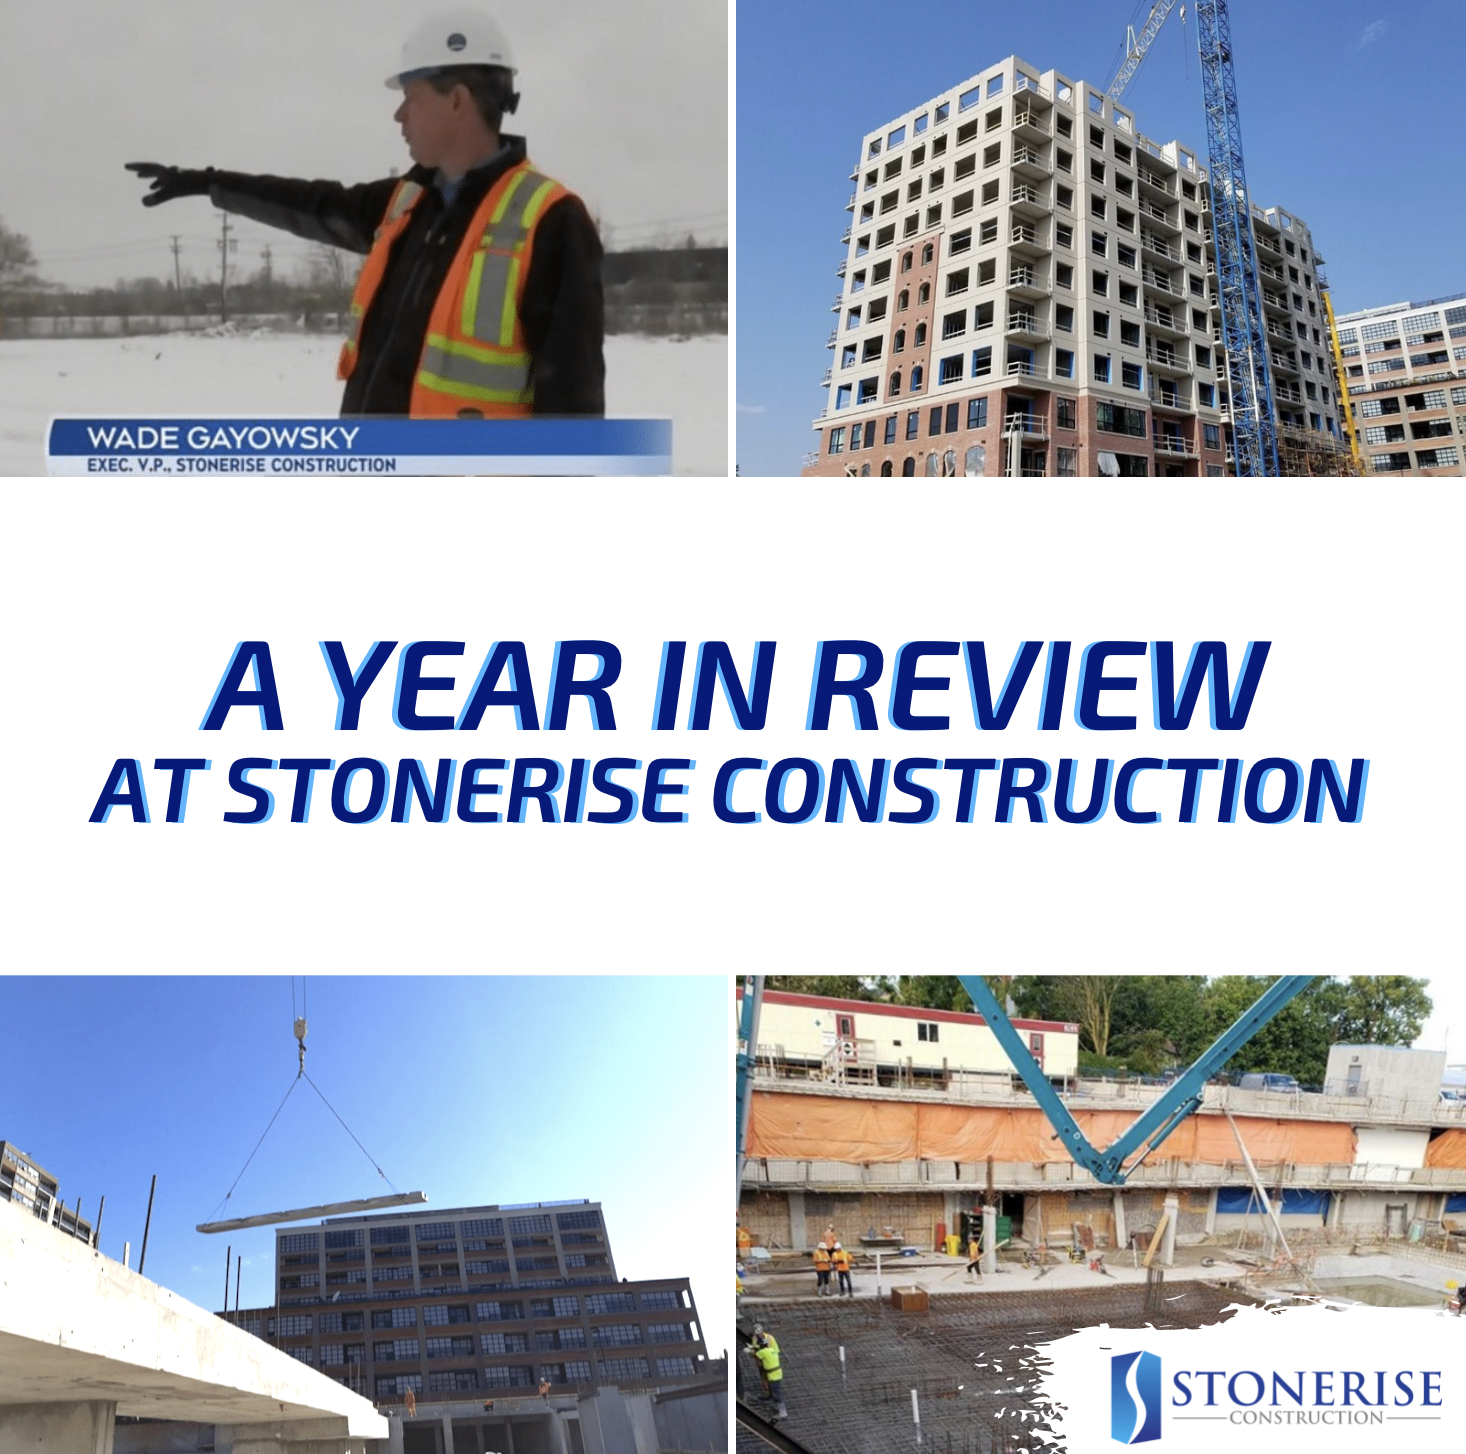 A Year in Review 2020 - Stonerise Construction